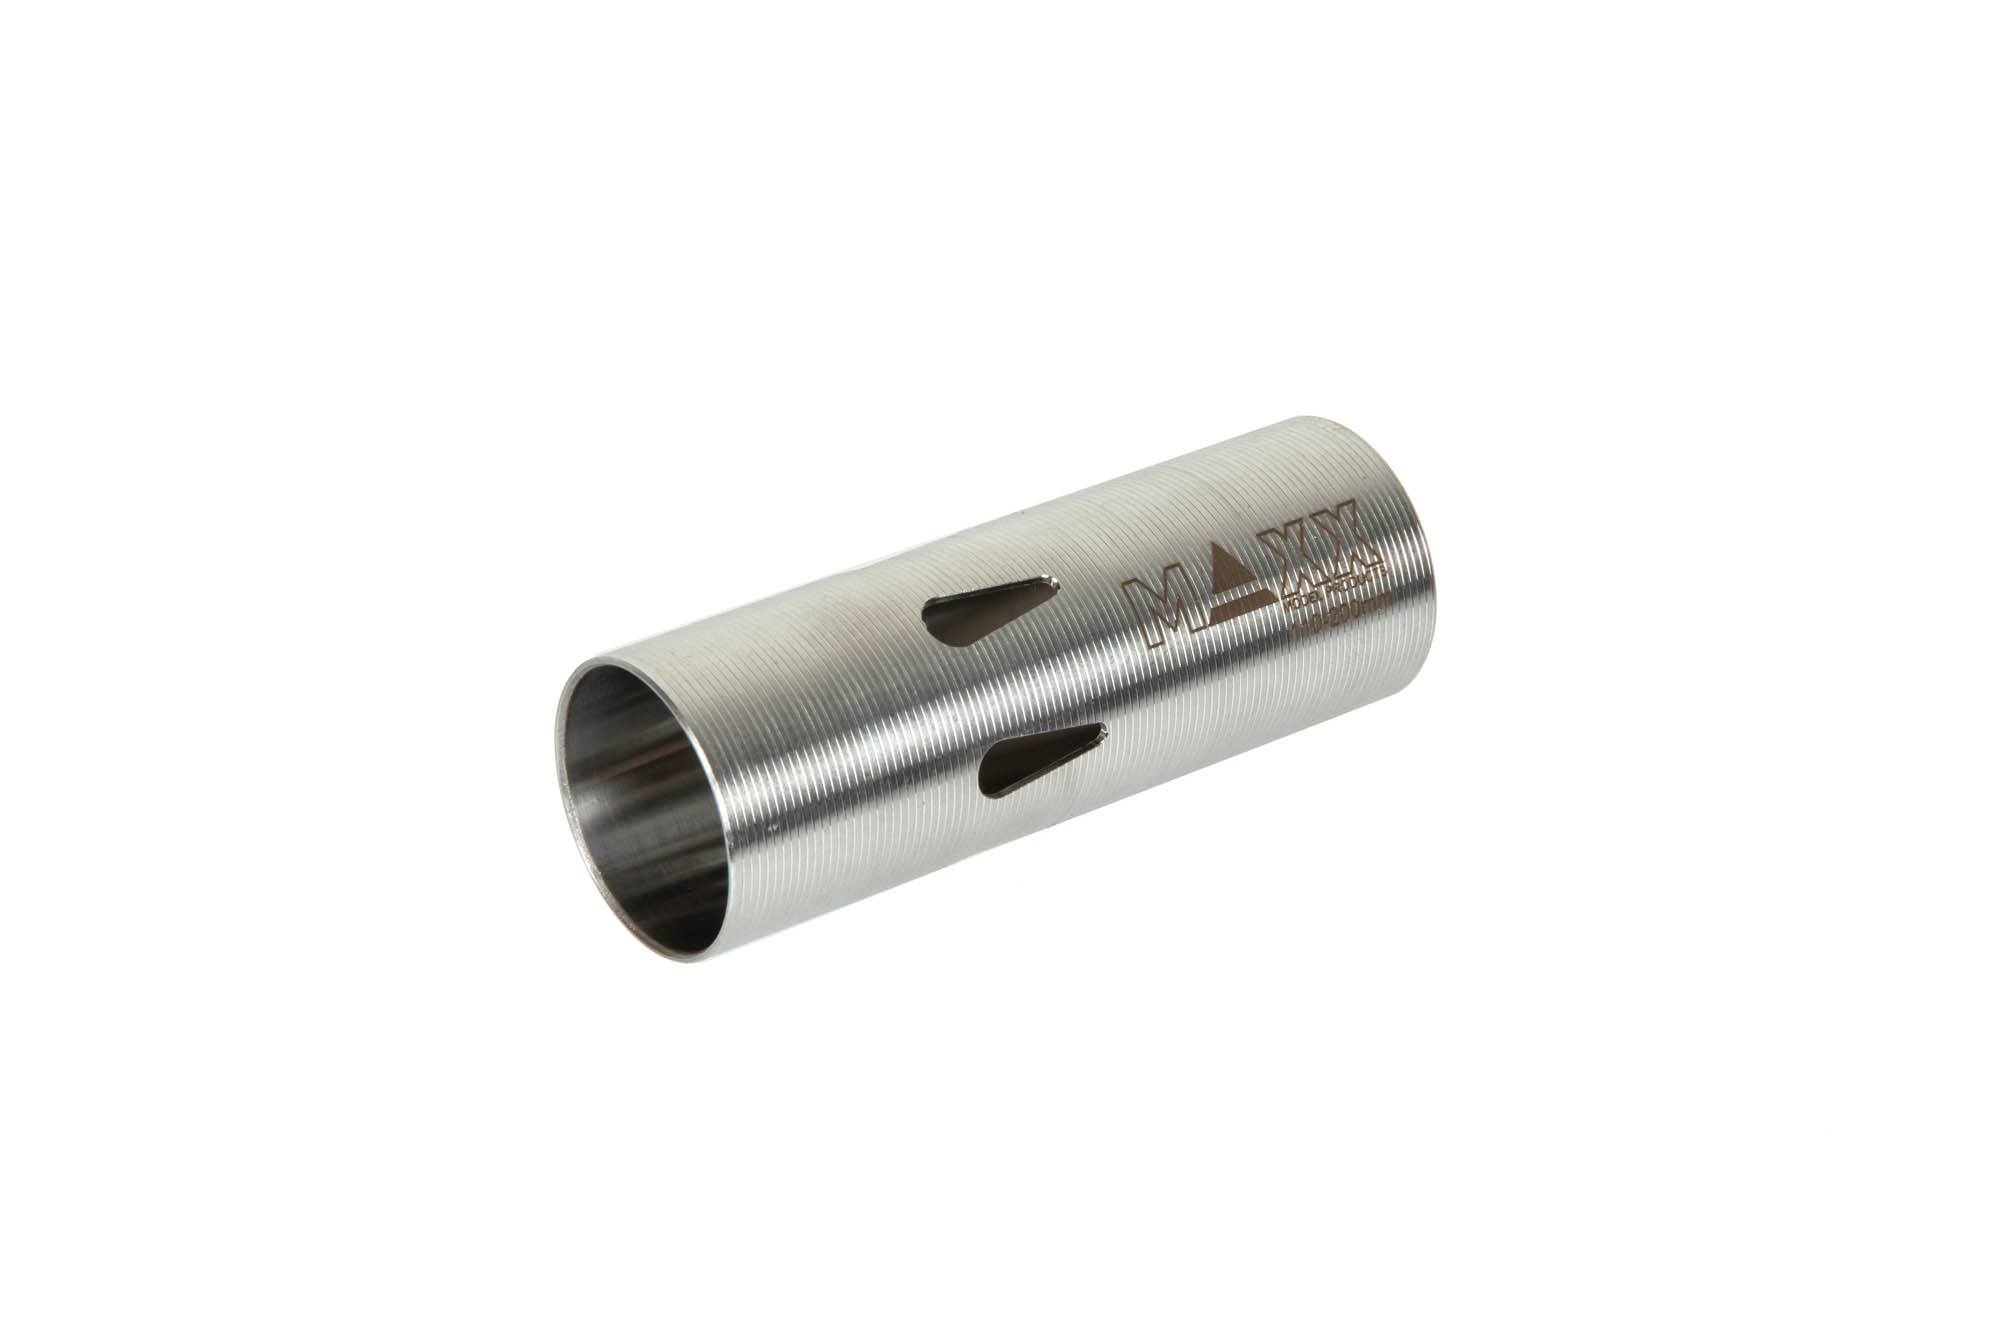 Hardened Stainless Steel Cylinder - Type E (200 - 250mm)